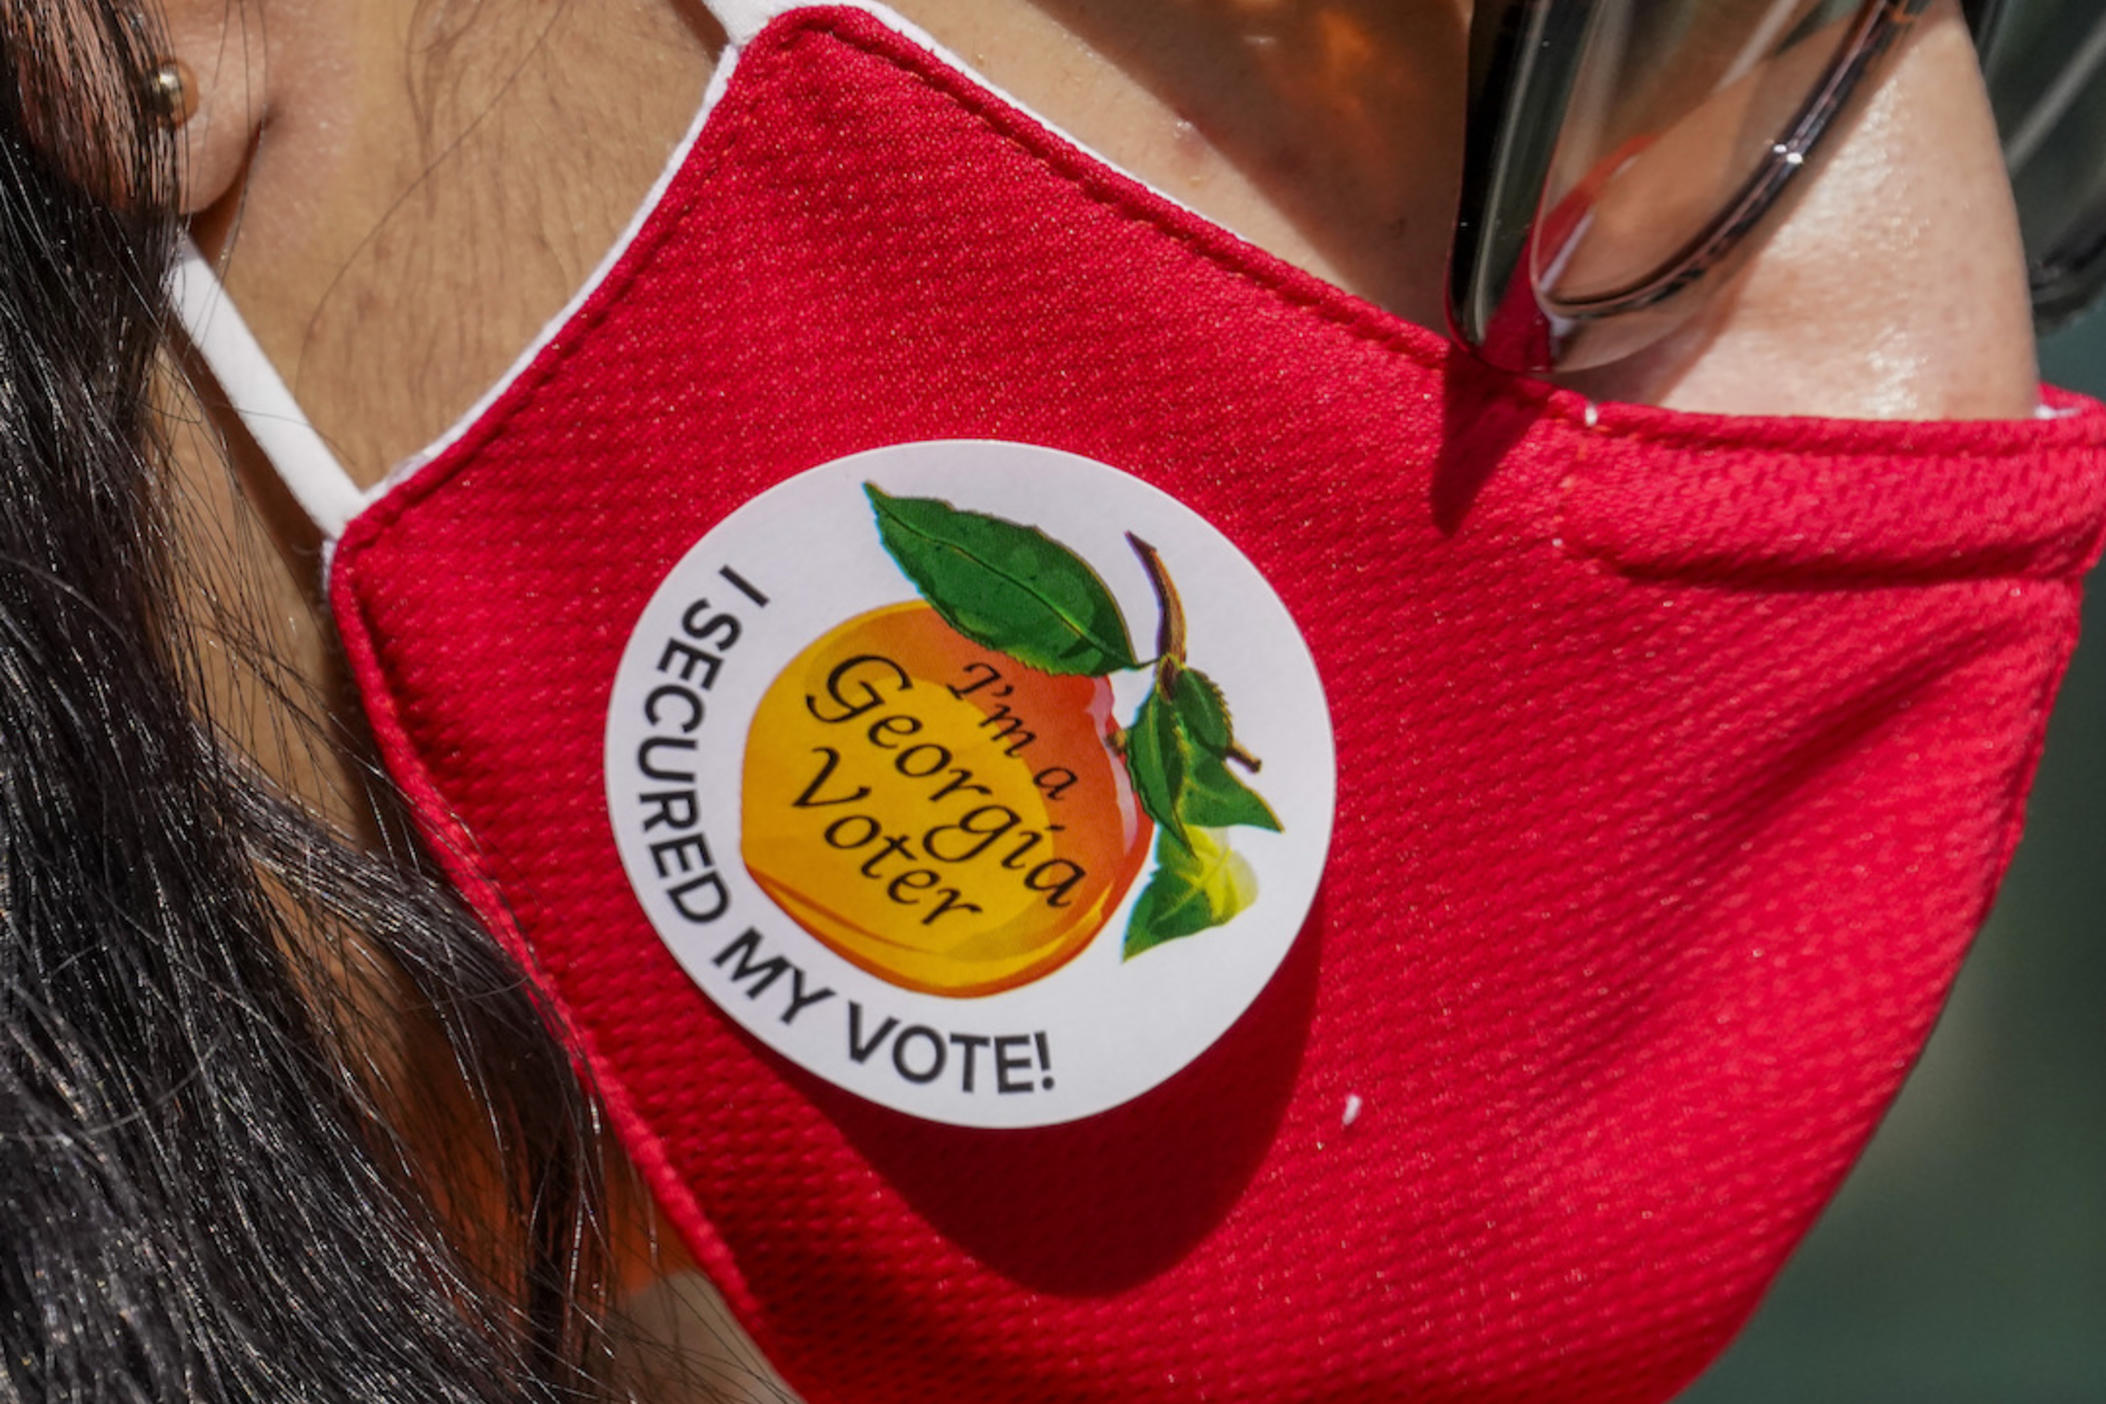 A person wears an “I’m a Georgia Voter” sticker after voting on Election Day in Atlanta on Tuesday, Nov. 3, 2020.